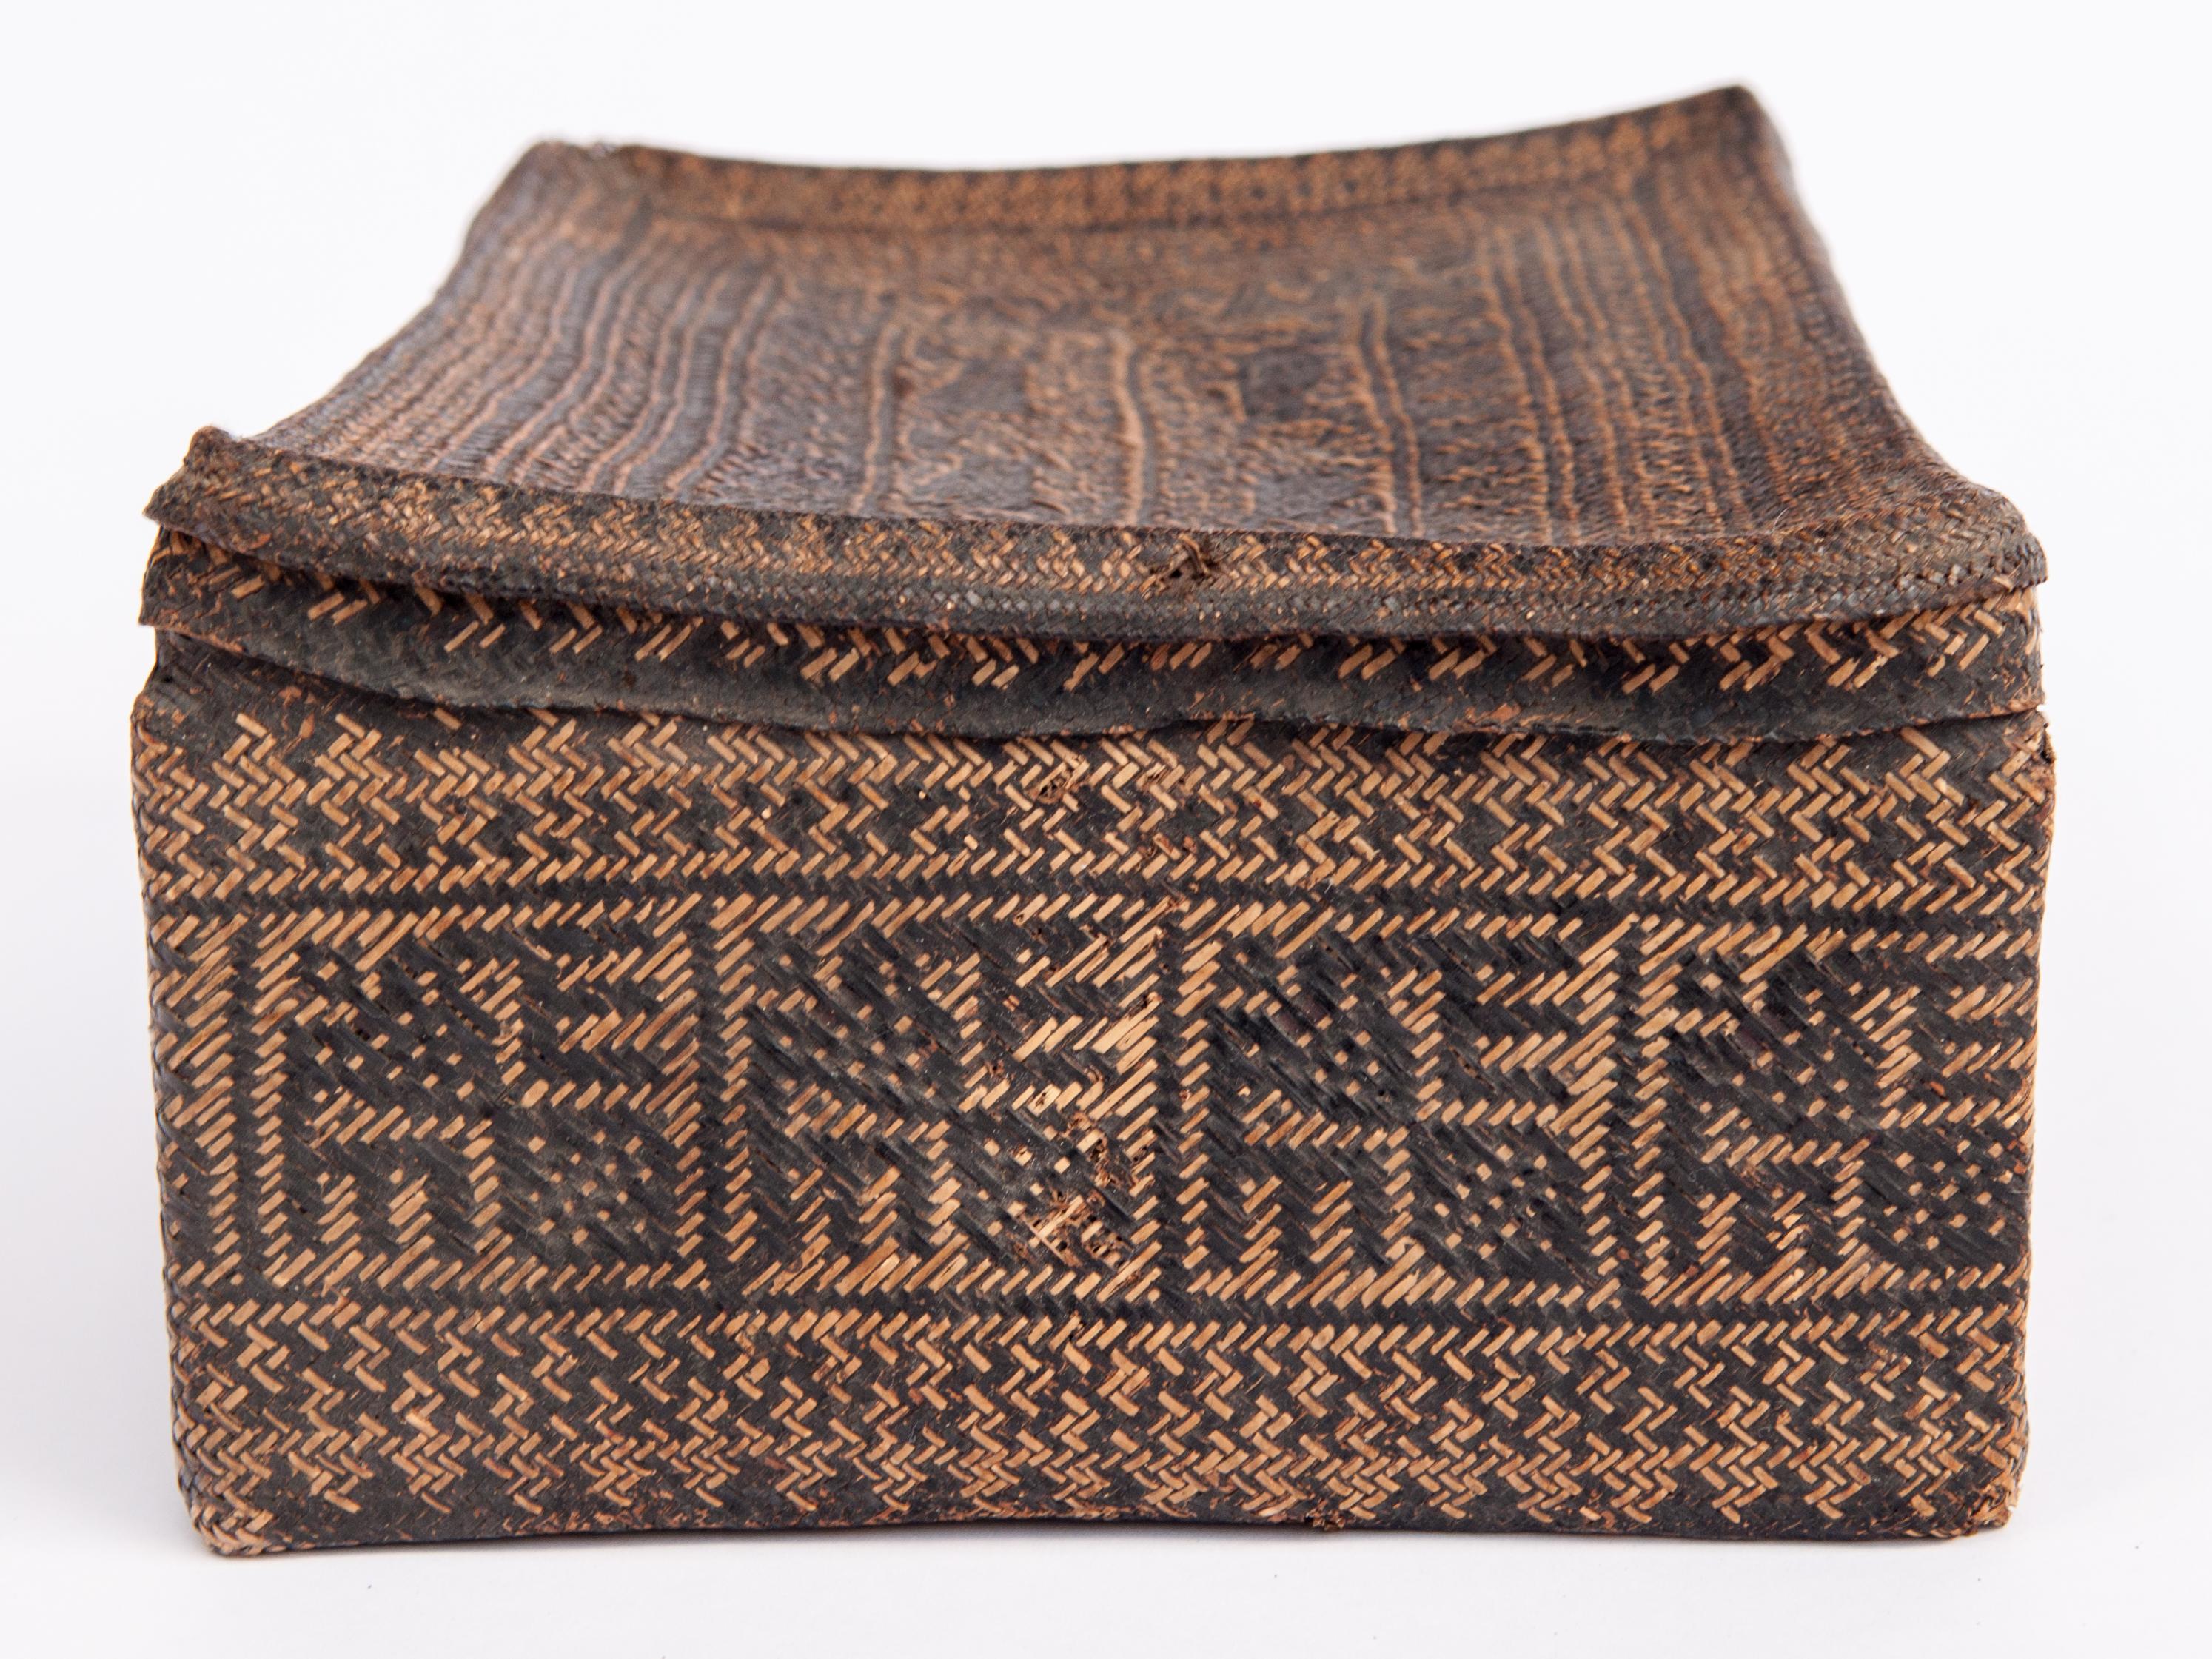 Hand-Crafted Betel Basket with Woven Design, Lampung, Sumatra Late 19th to Early 20th Century